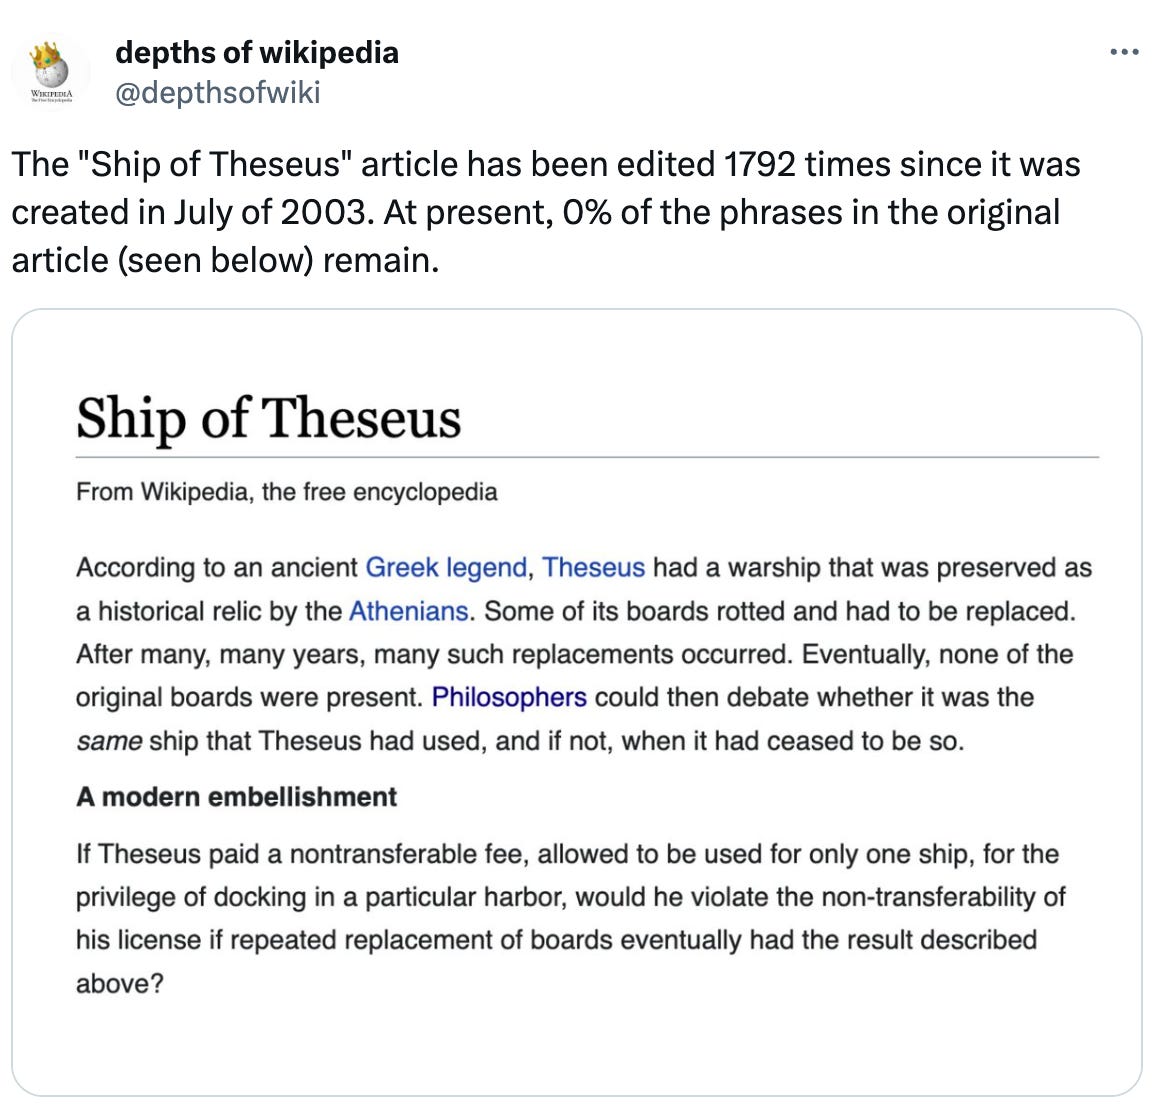  See new posts Conversation depths of wikipedia @depthsofwiki The "Ship of Theseus" article has been edited 1792 times since it was created in July of 2003. At present, 0% of the phrases in the original article (seen below) remain.